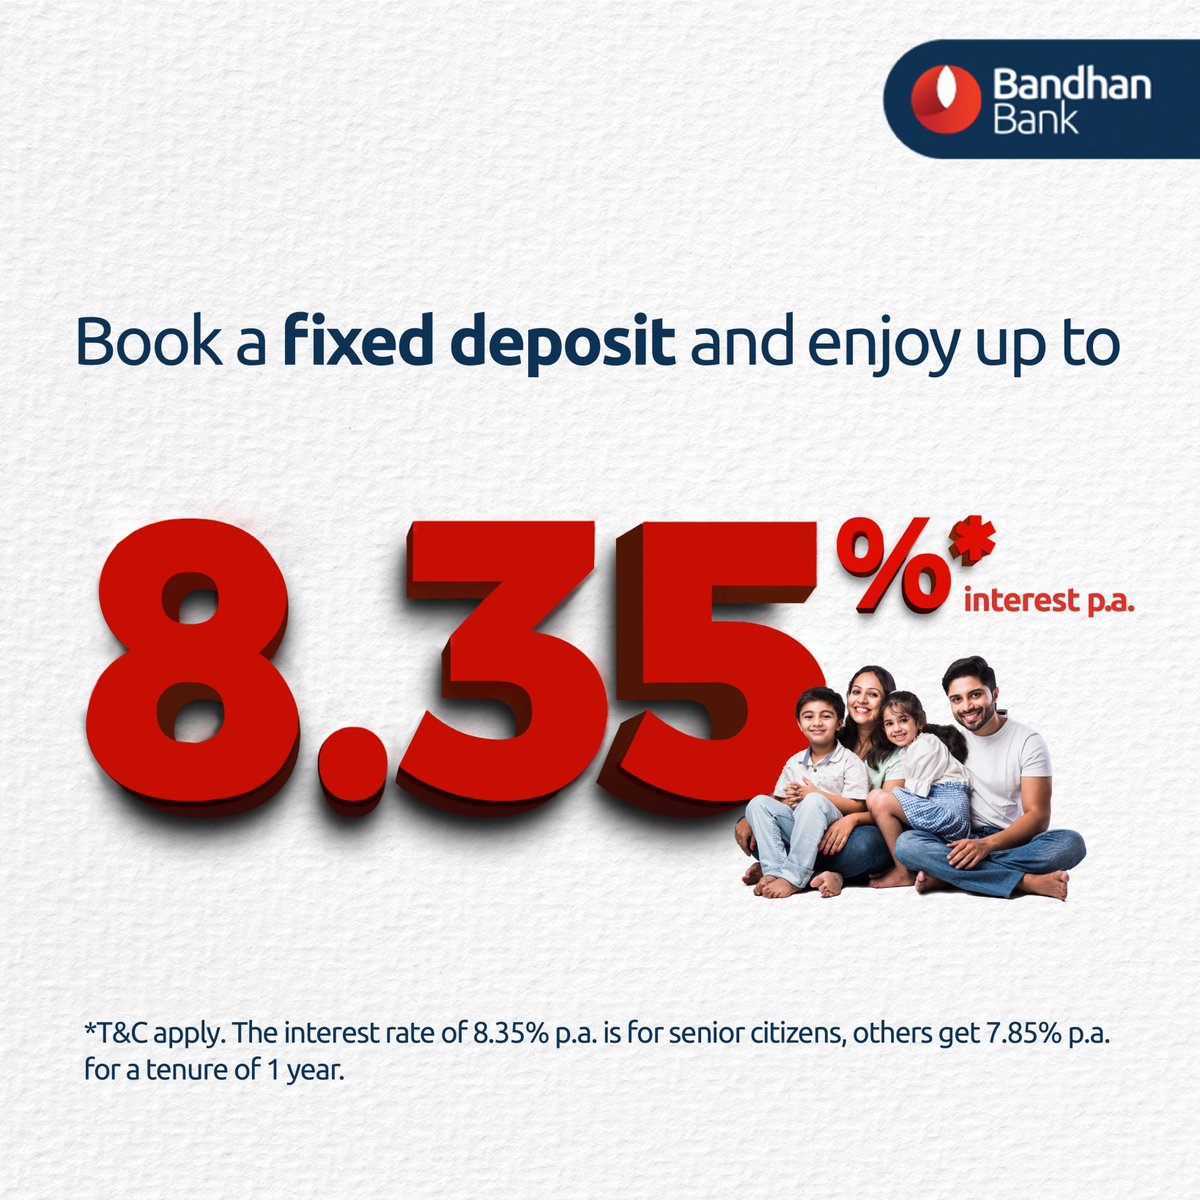 Grow your savings with a #FixedDeposit. Book an FD using Internet banking: bit.ly/3MzVWoi, mBandhan app: bit.ly/48setLP, or by visiting your nearest branch: bit.ly/40ltnAx

#BandhanBank T&C apply.